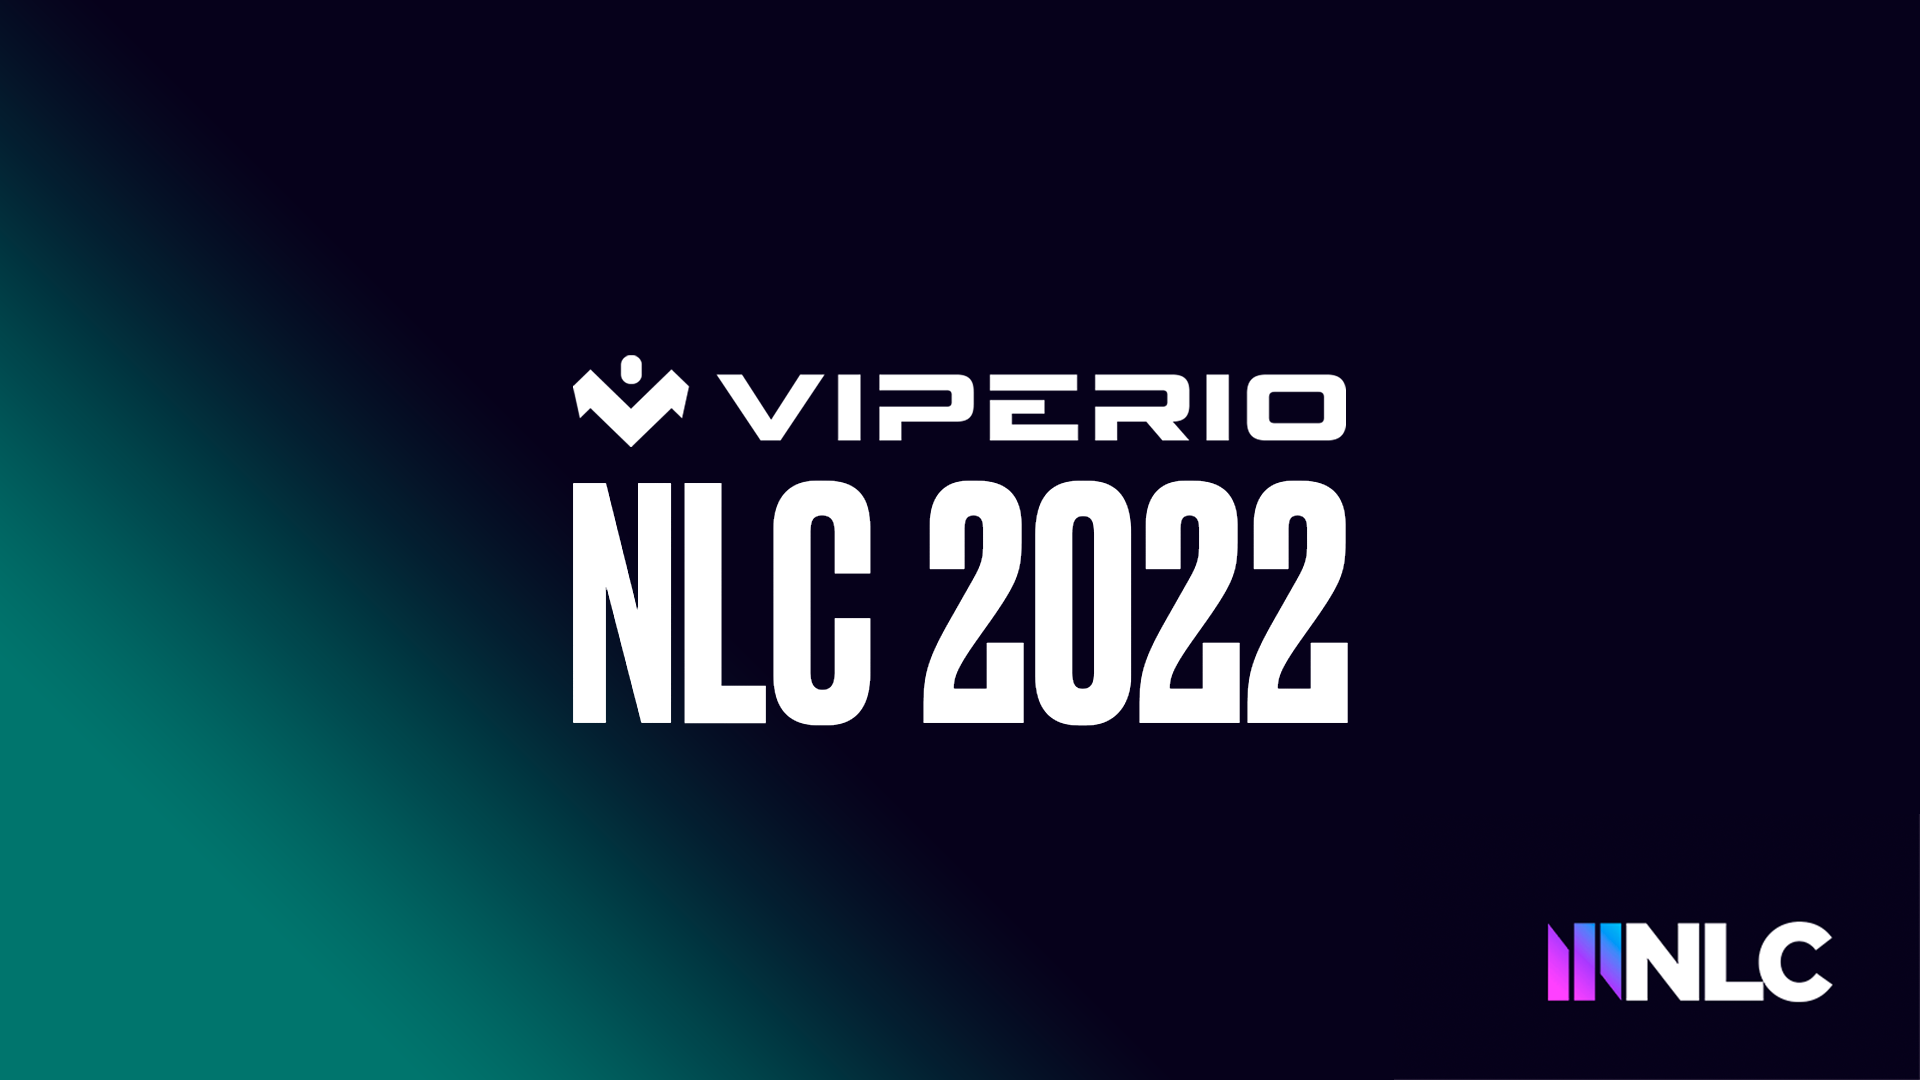 Viperio hunt for new League of Legends Team Manager